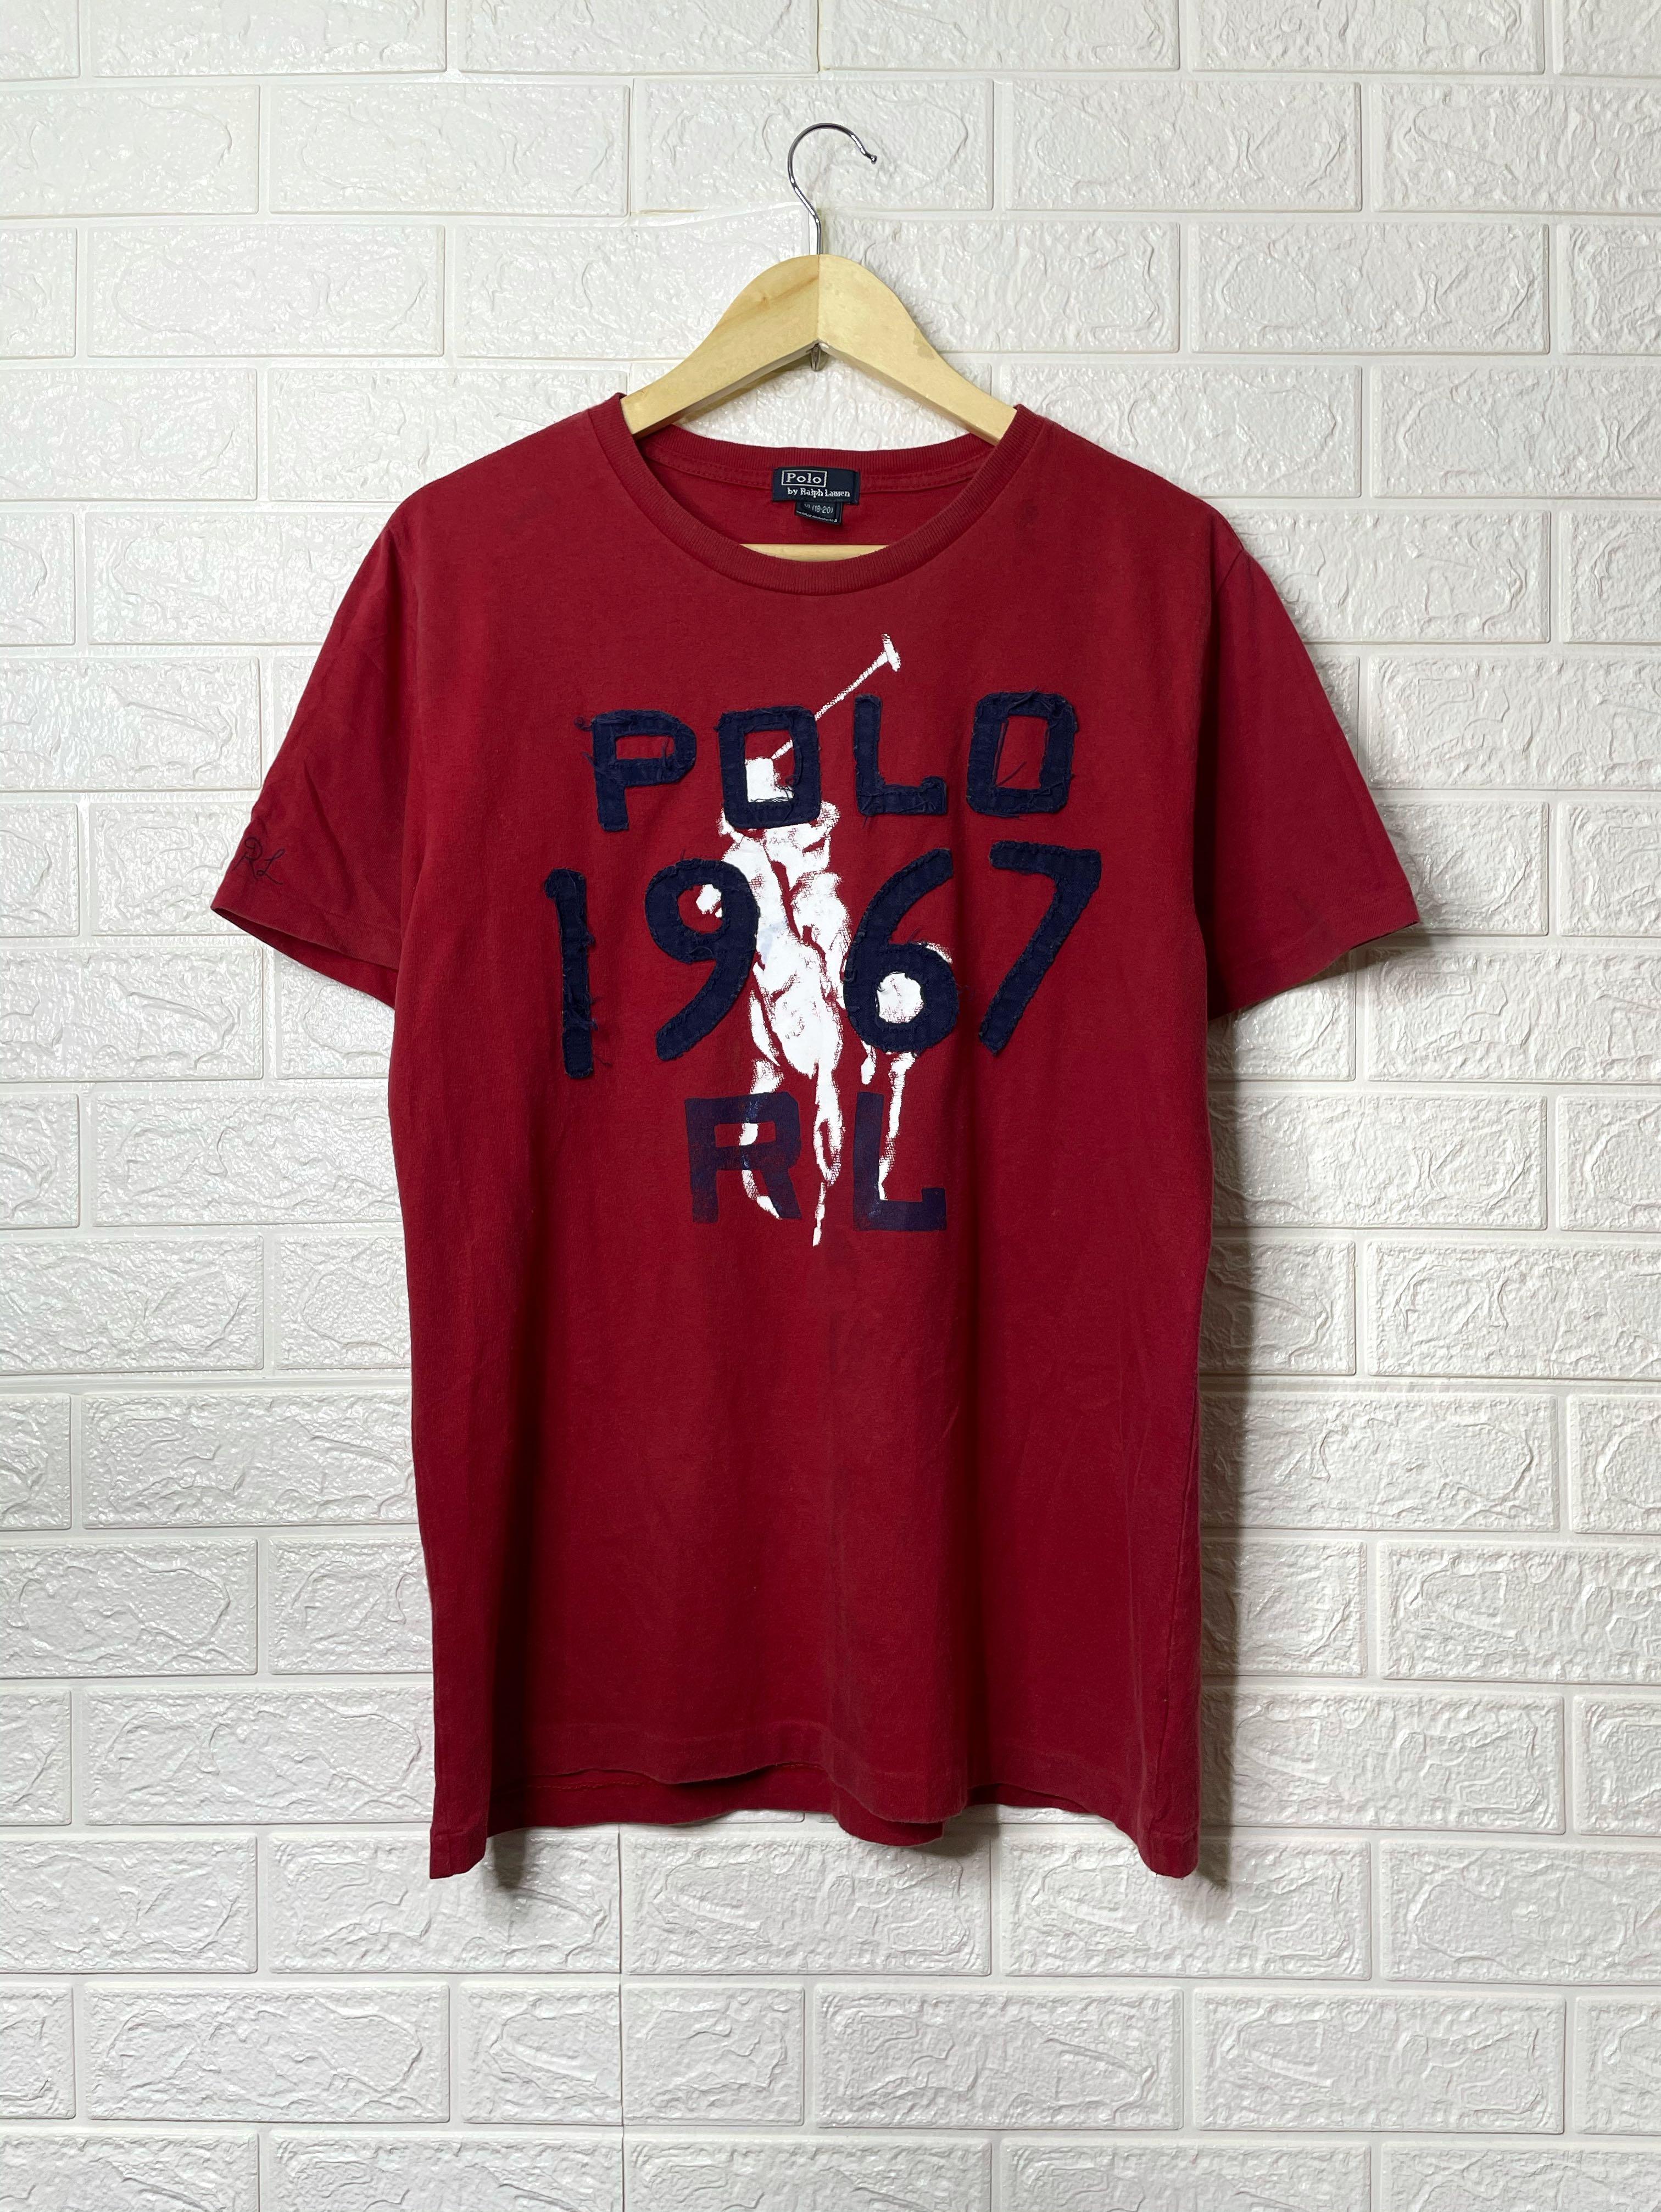 VINTAGE POLO RALPH LAUREN 1967 SHIRT WITH STITCHED DESIGN, Men's Fashion,  Tops & Sets, Tshirts & Polo Shirts on Carousell